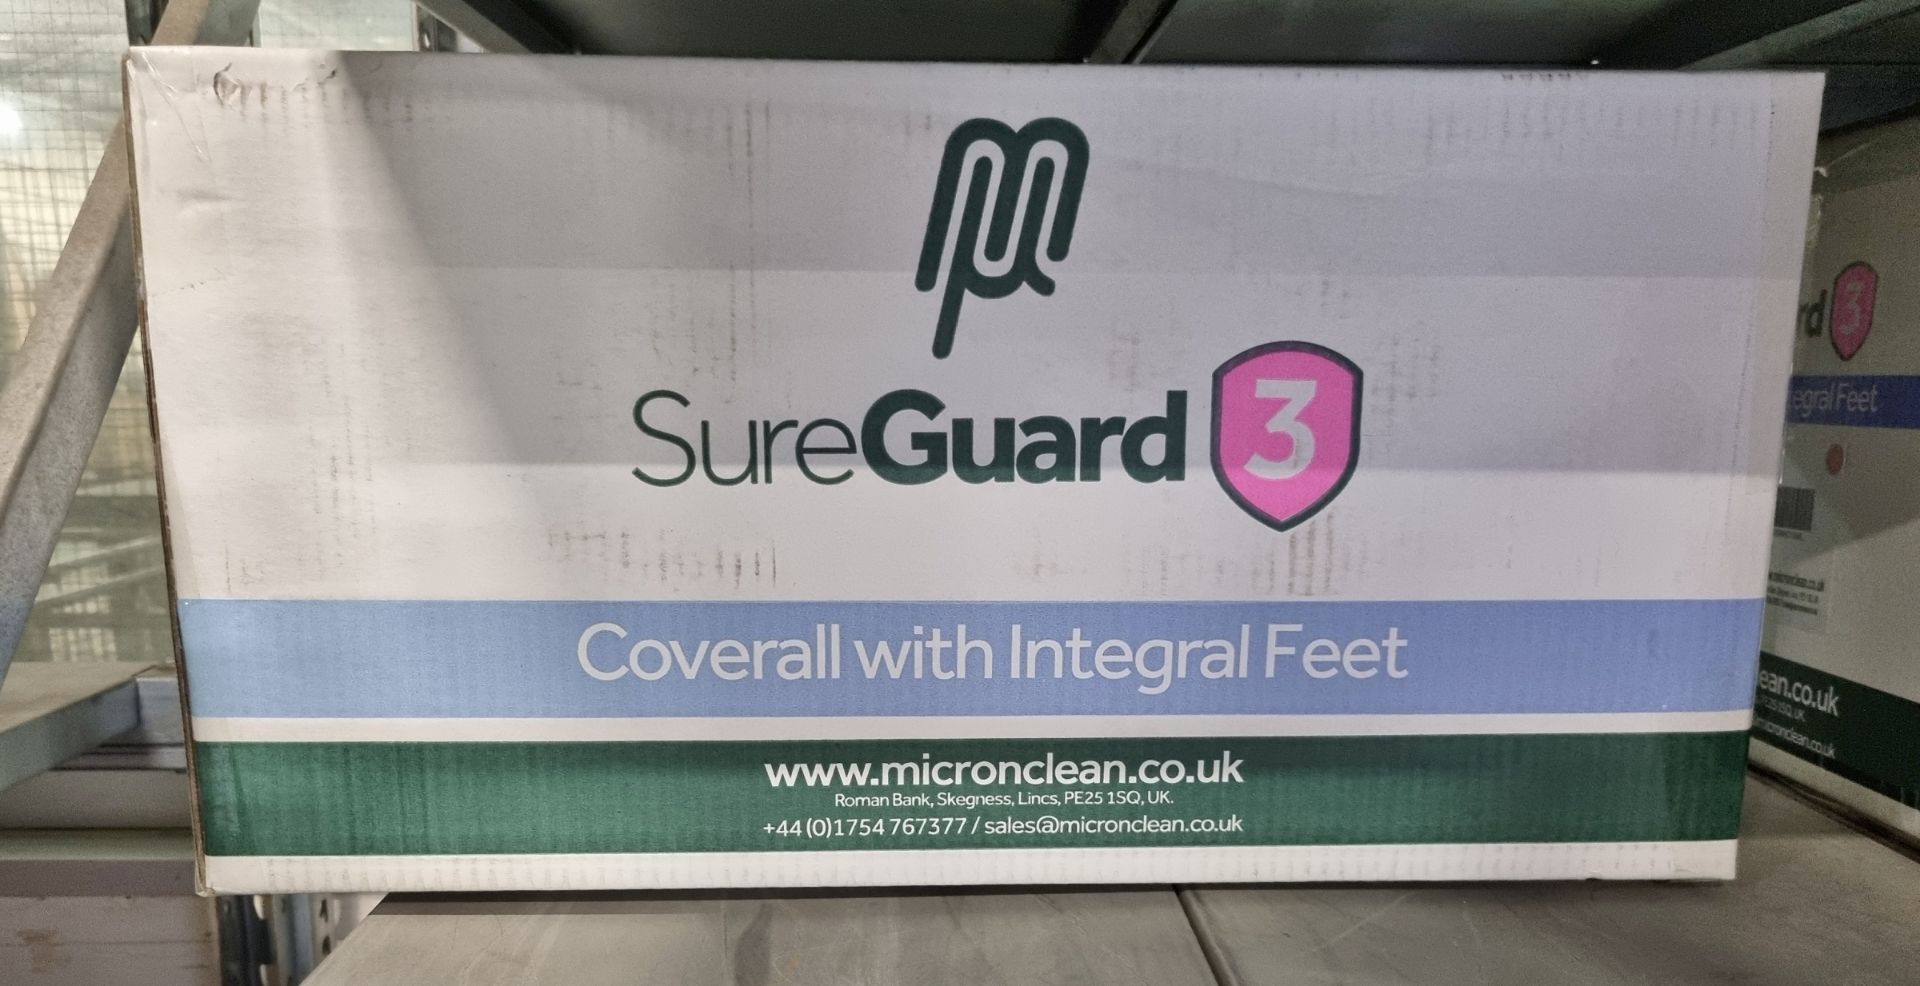 2x boxes of MicroClean SureGuard 3 - size small coverall with integral feet - 25 units per box - Bild 6 aus 6